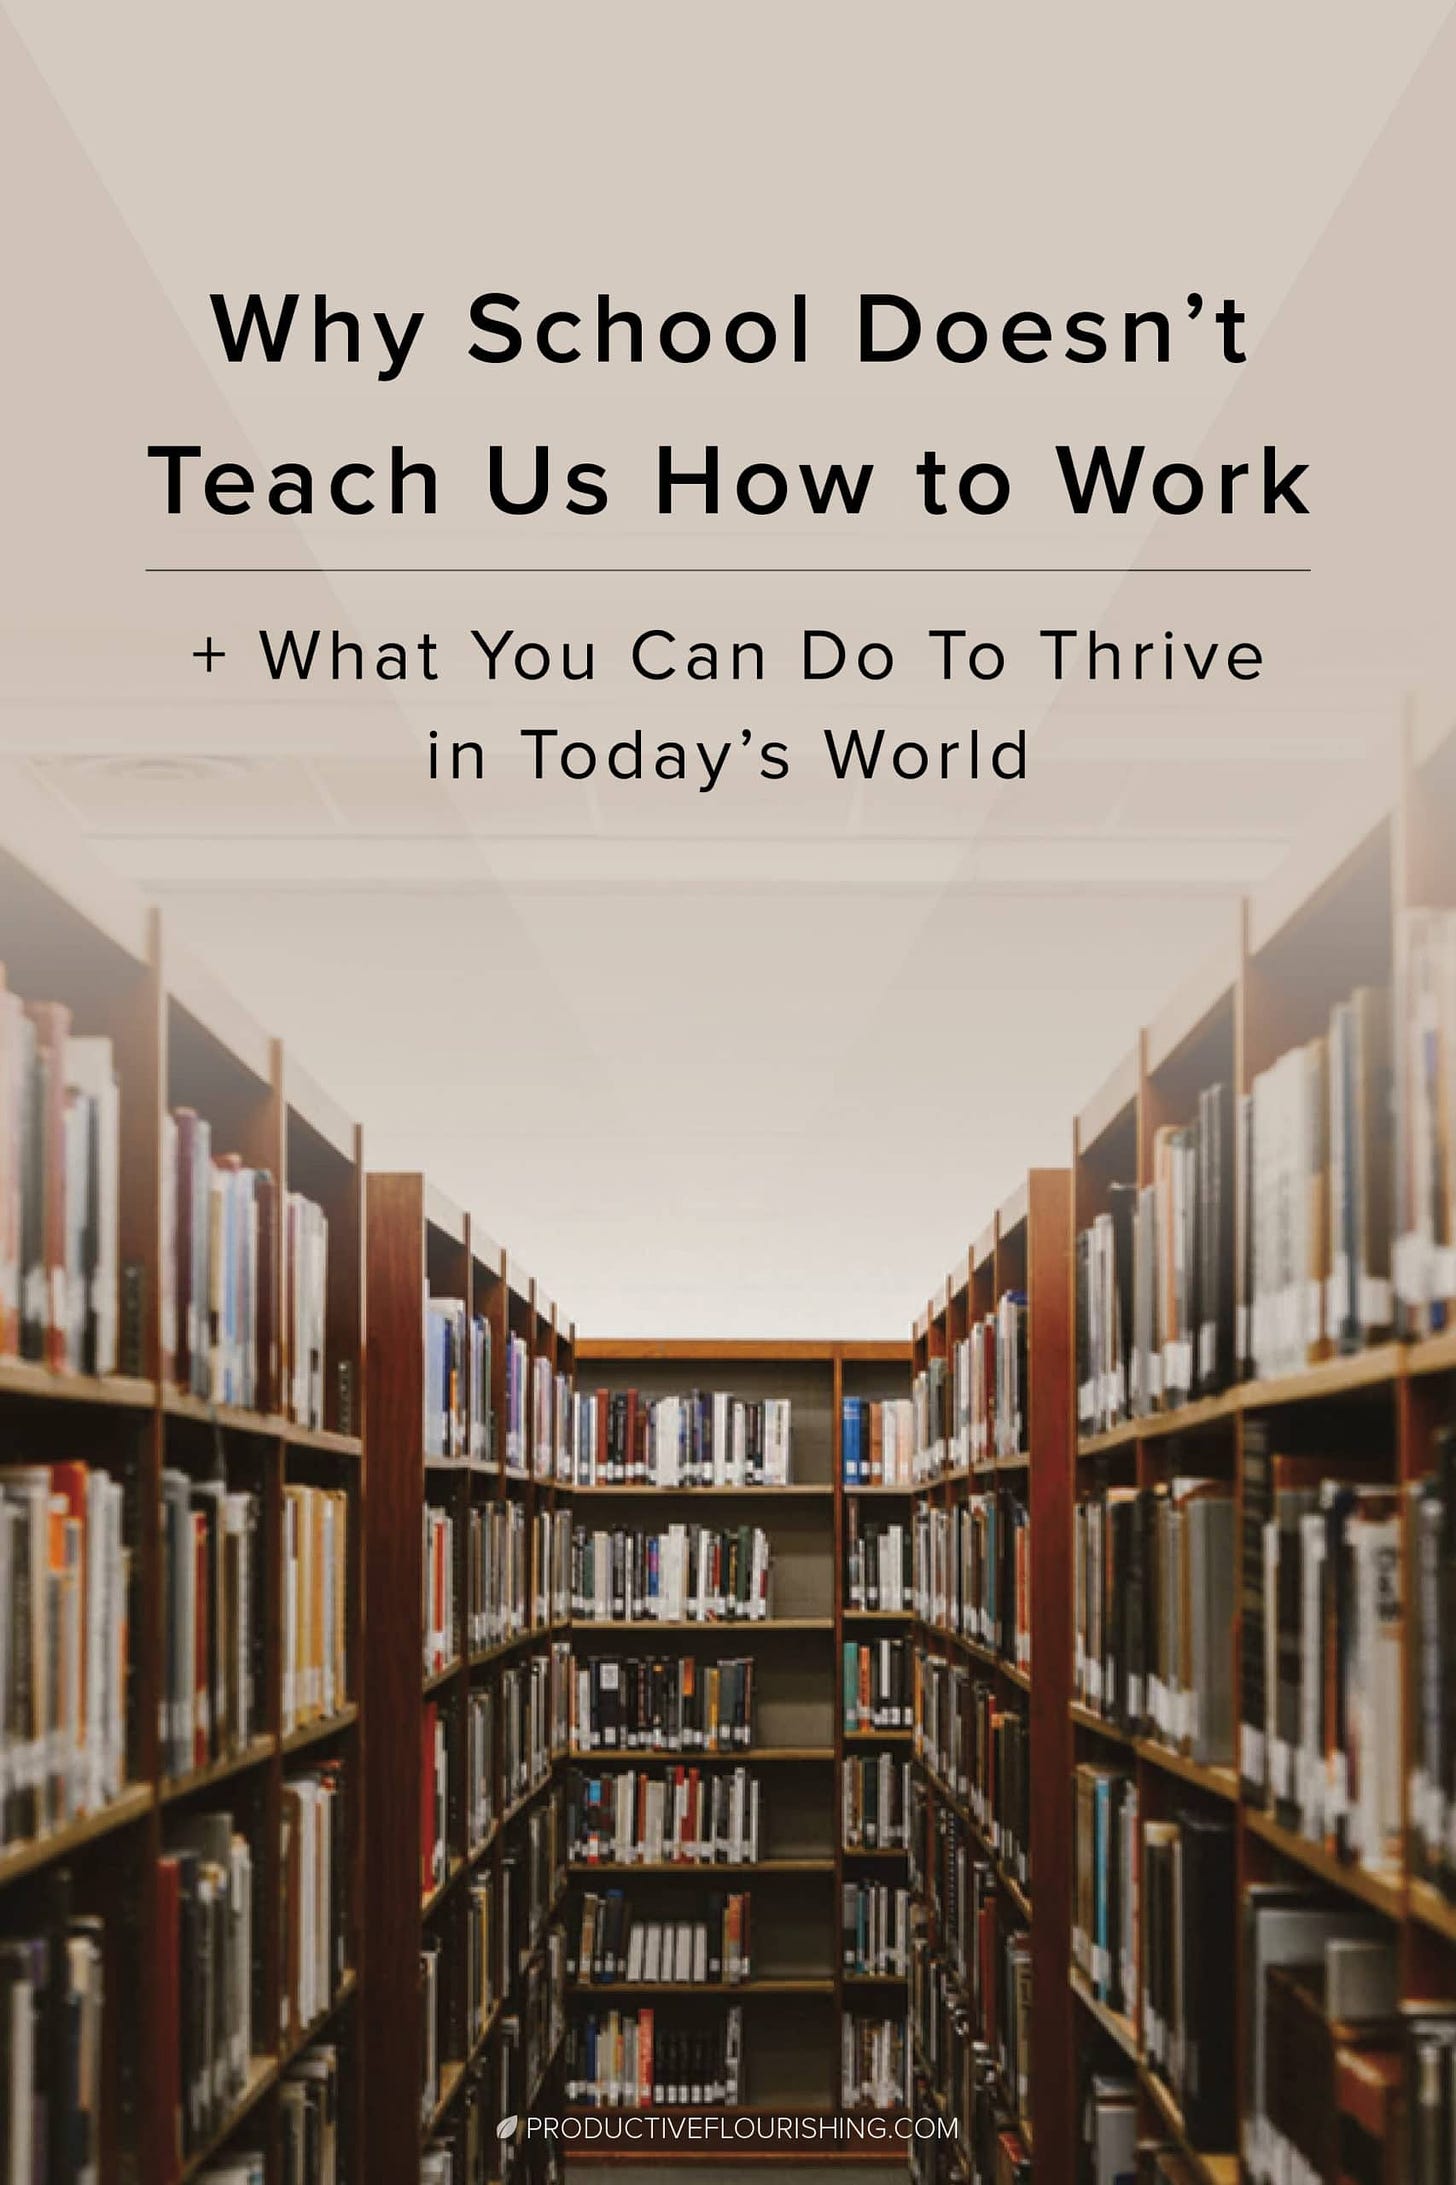 Why School Doesn't Teach Us How To Work. And What You Can Do To Thrive in Today's World. Click here to learn 5 ways school teaches us to be managed - not to manage ourselves. The good news is that these practices can be learned. The big step is learning that what you know isn’t nearly as important as the work you finish in the world. #schoolwork #creativebusiness #productiveflourishing